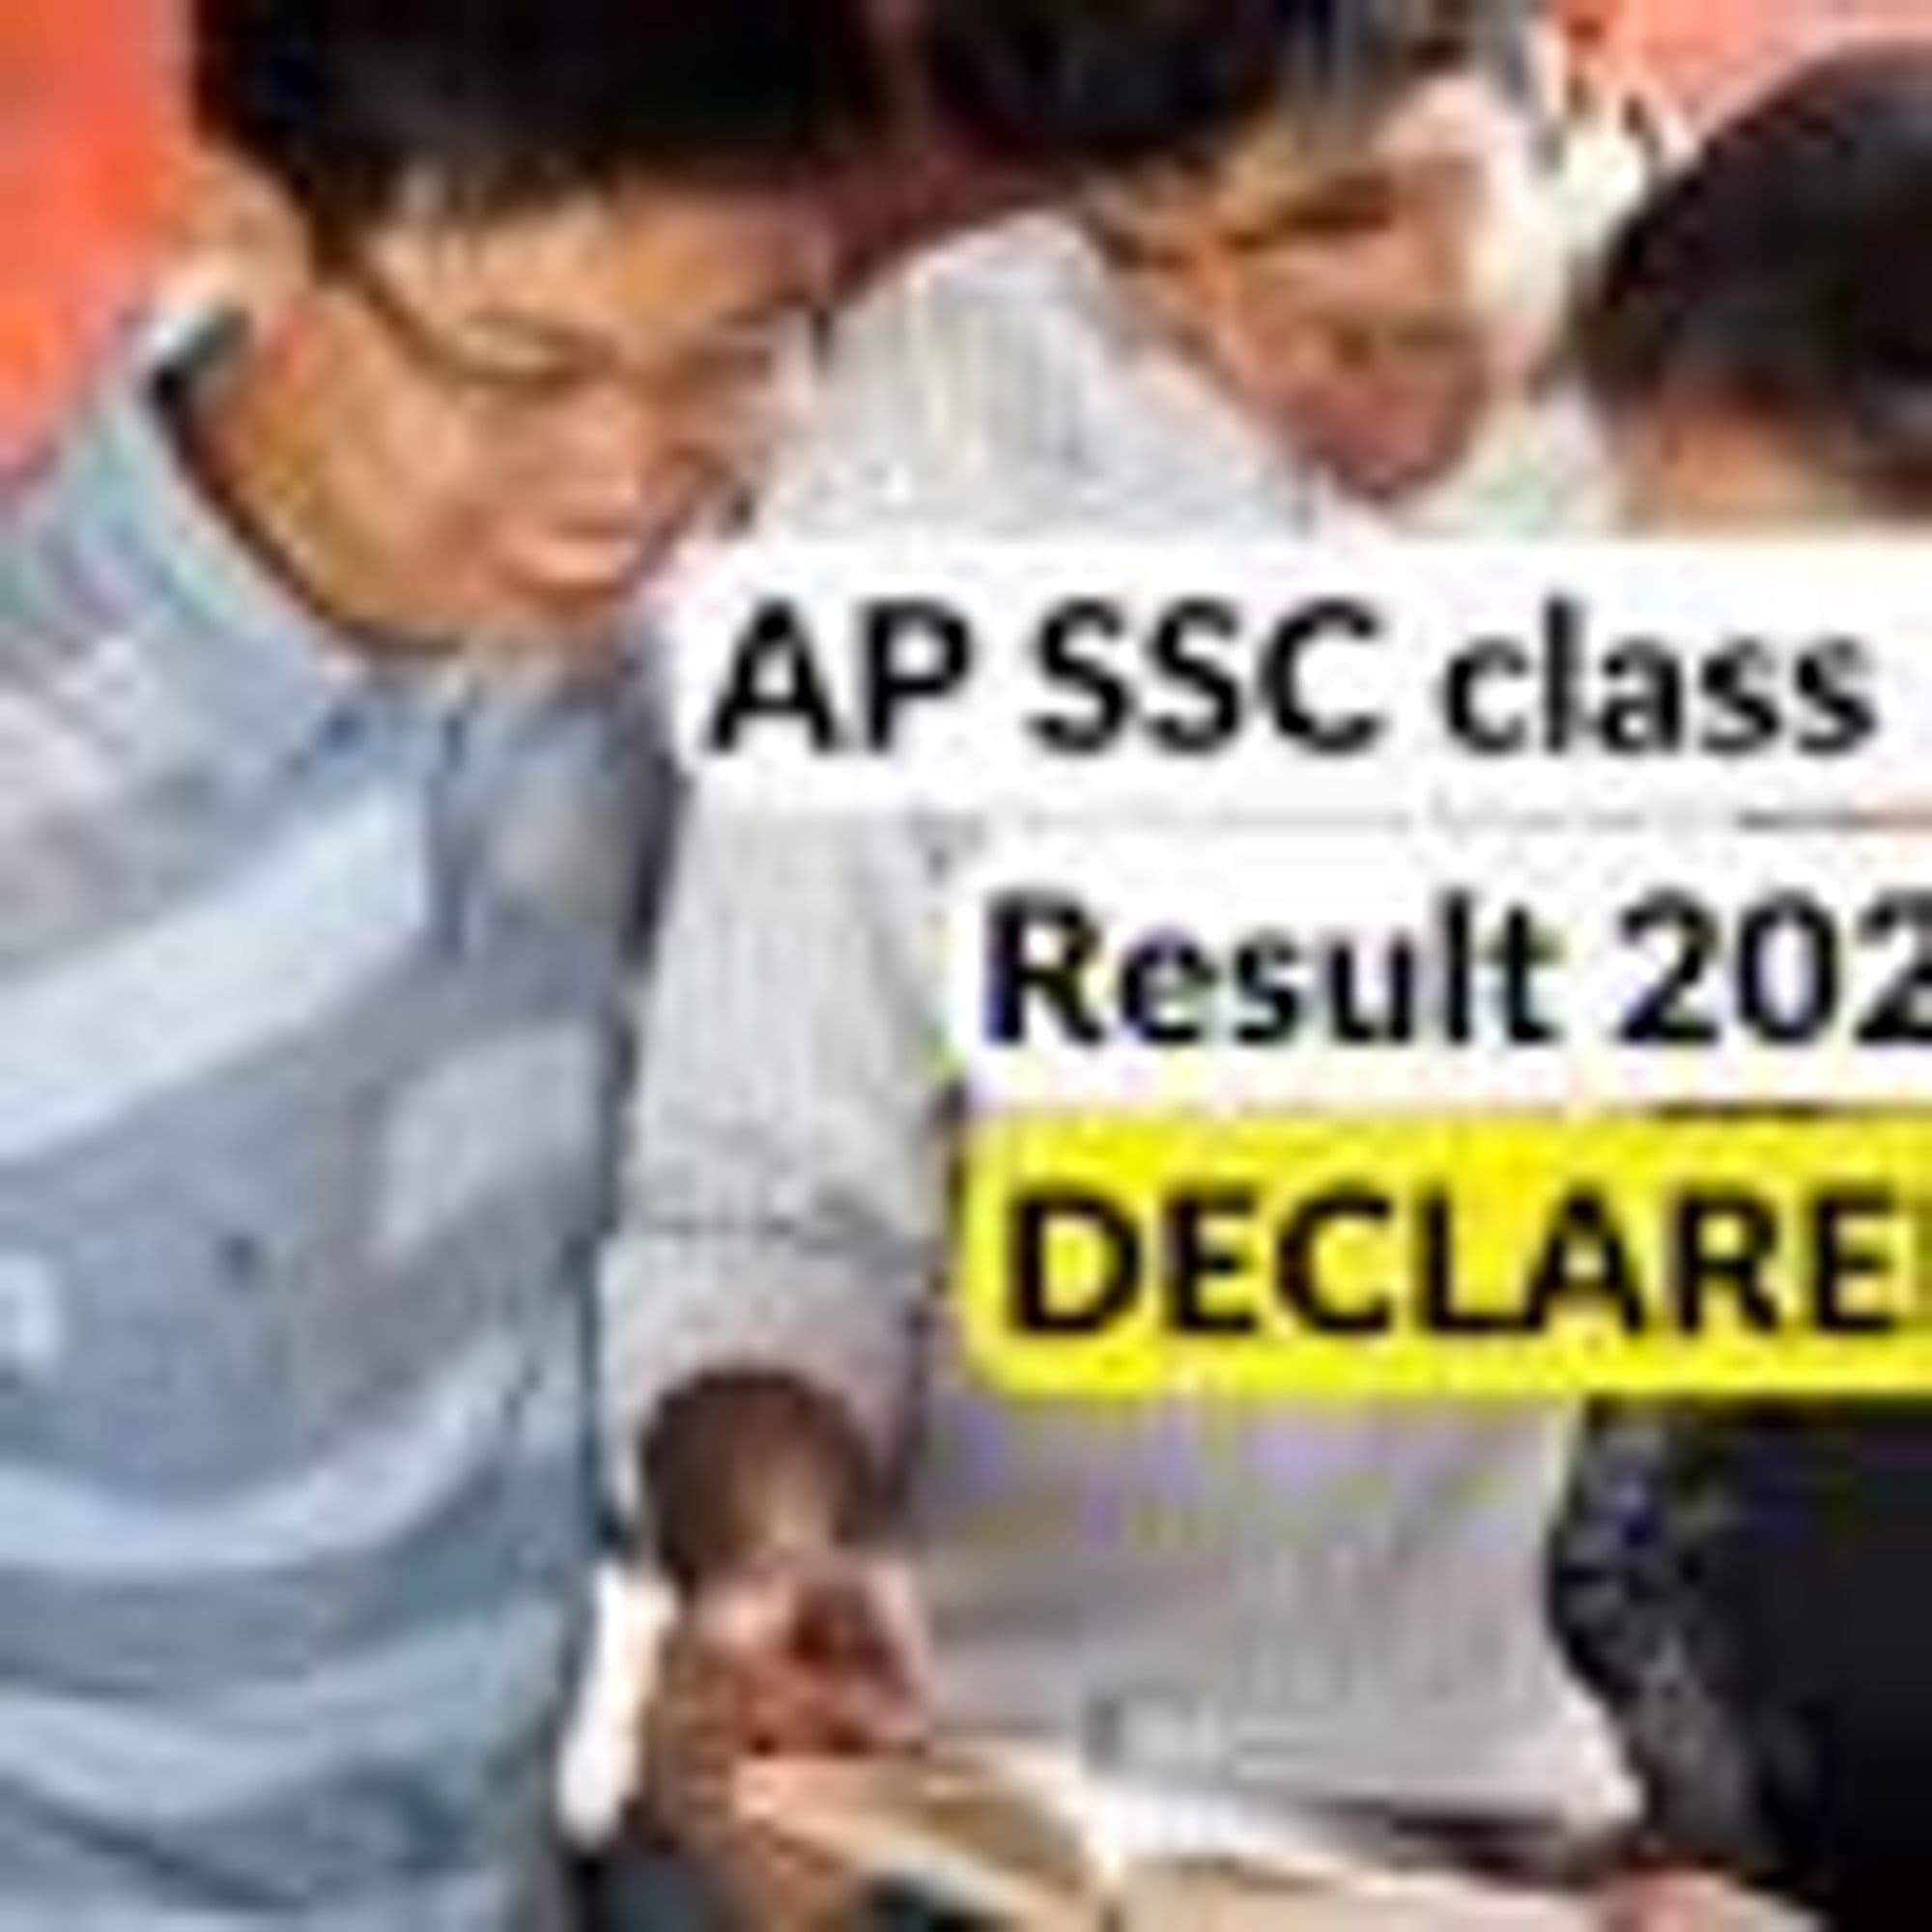 # Breaking News: AP SSC 10th Result 2024 Declared